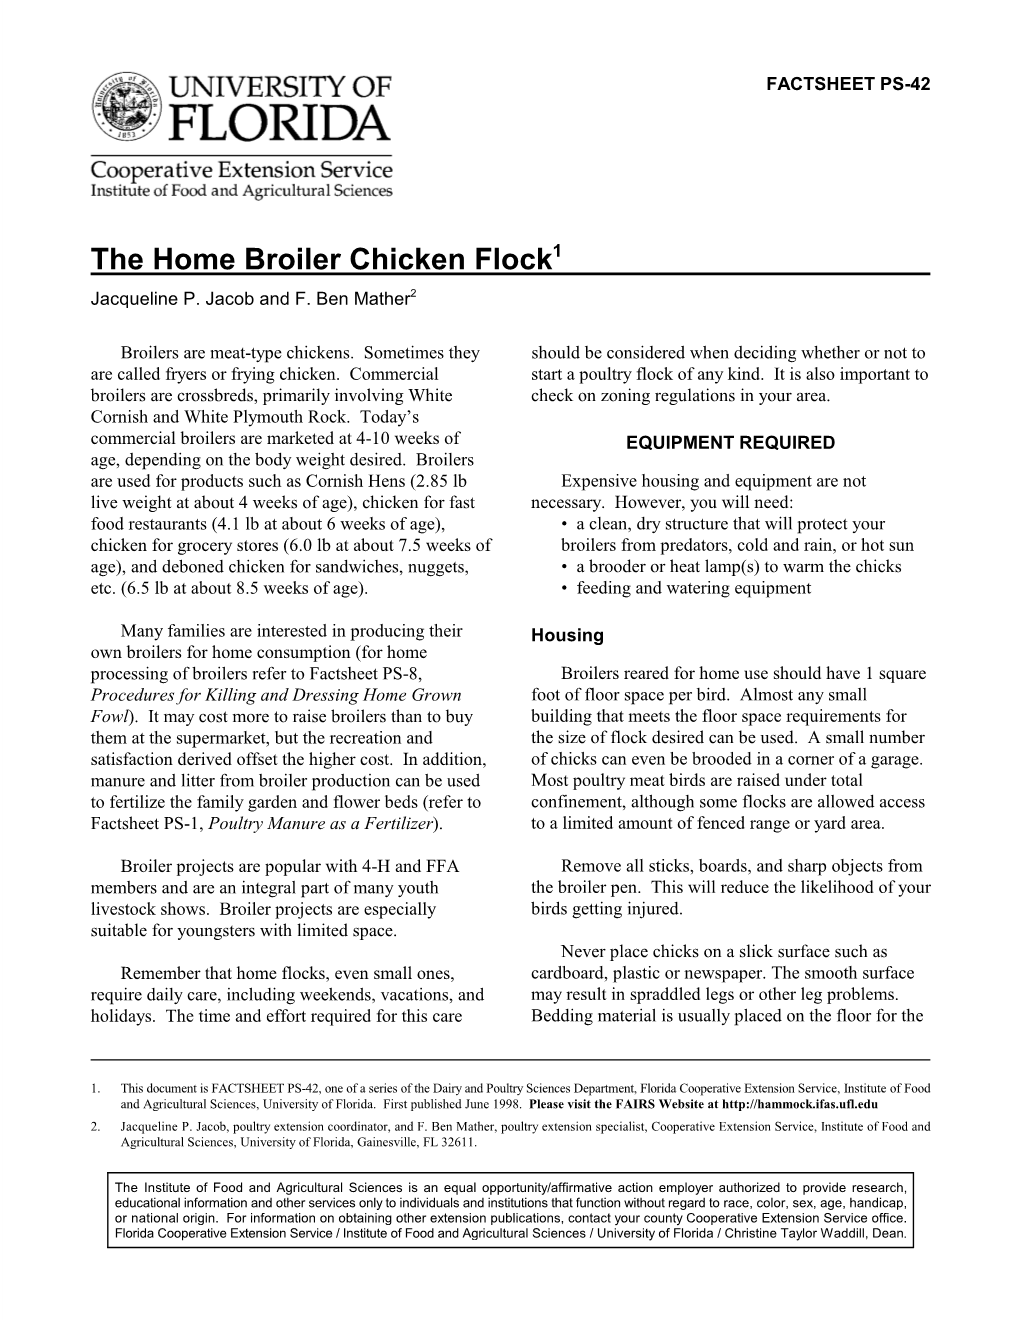 The Home Broiler Chicken Flock1 Jacqueline P